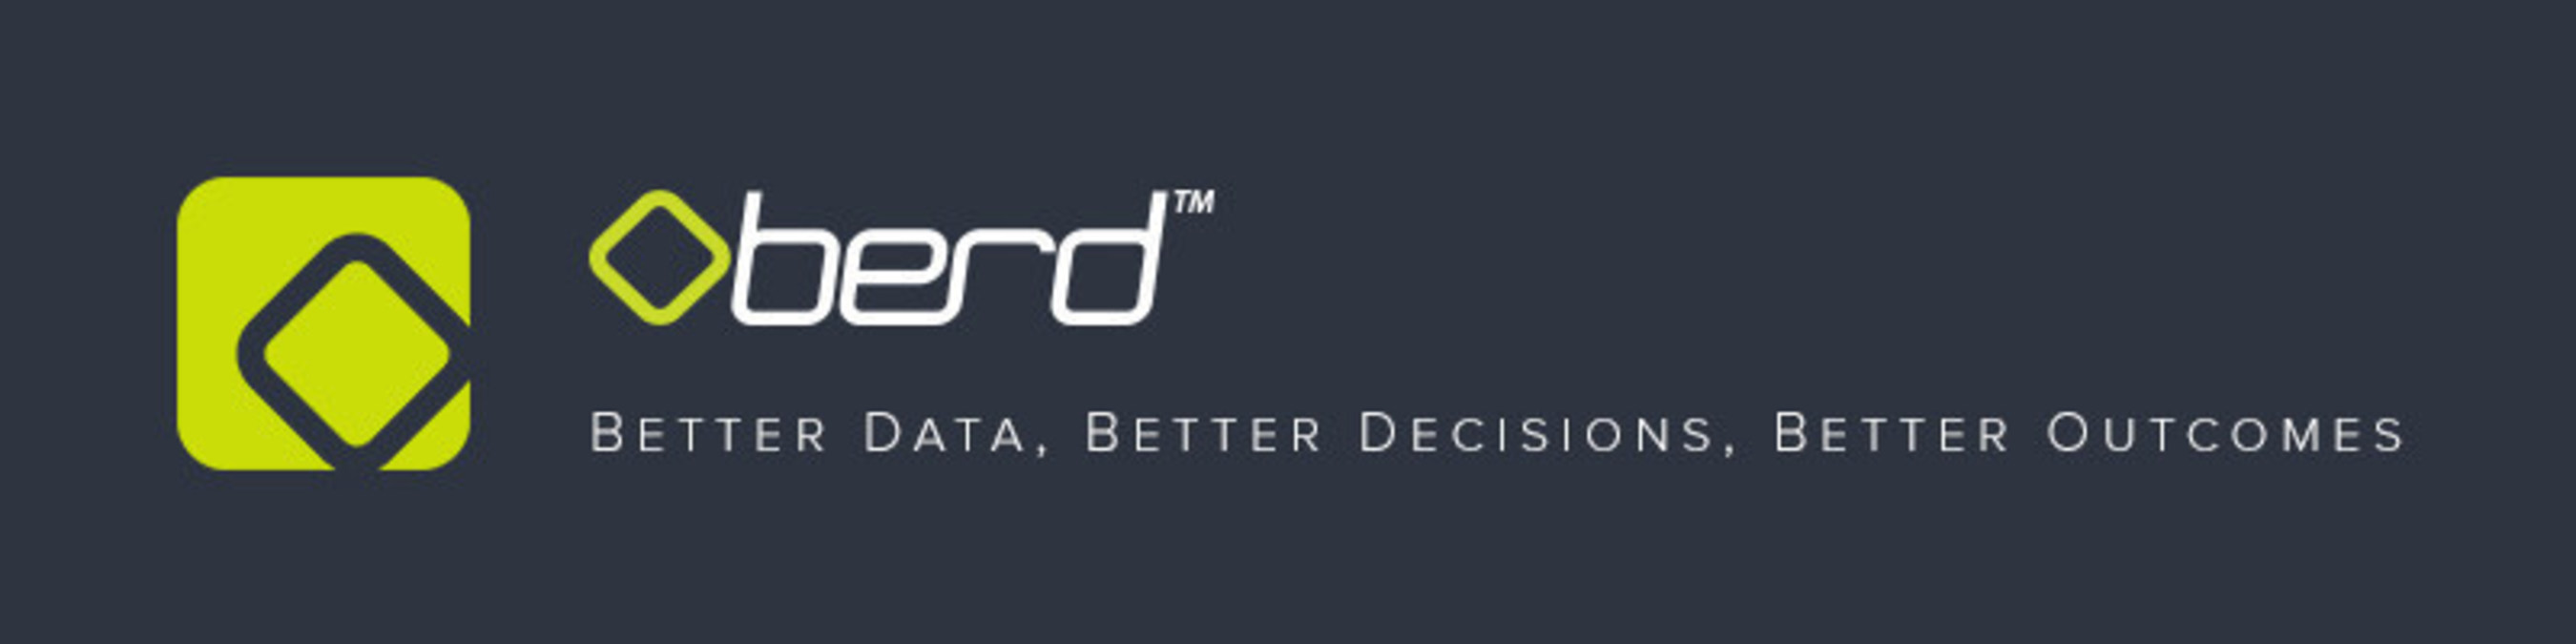 Oberd, a leader in outcomes data collection. (PRNewsFoto/OBERD)